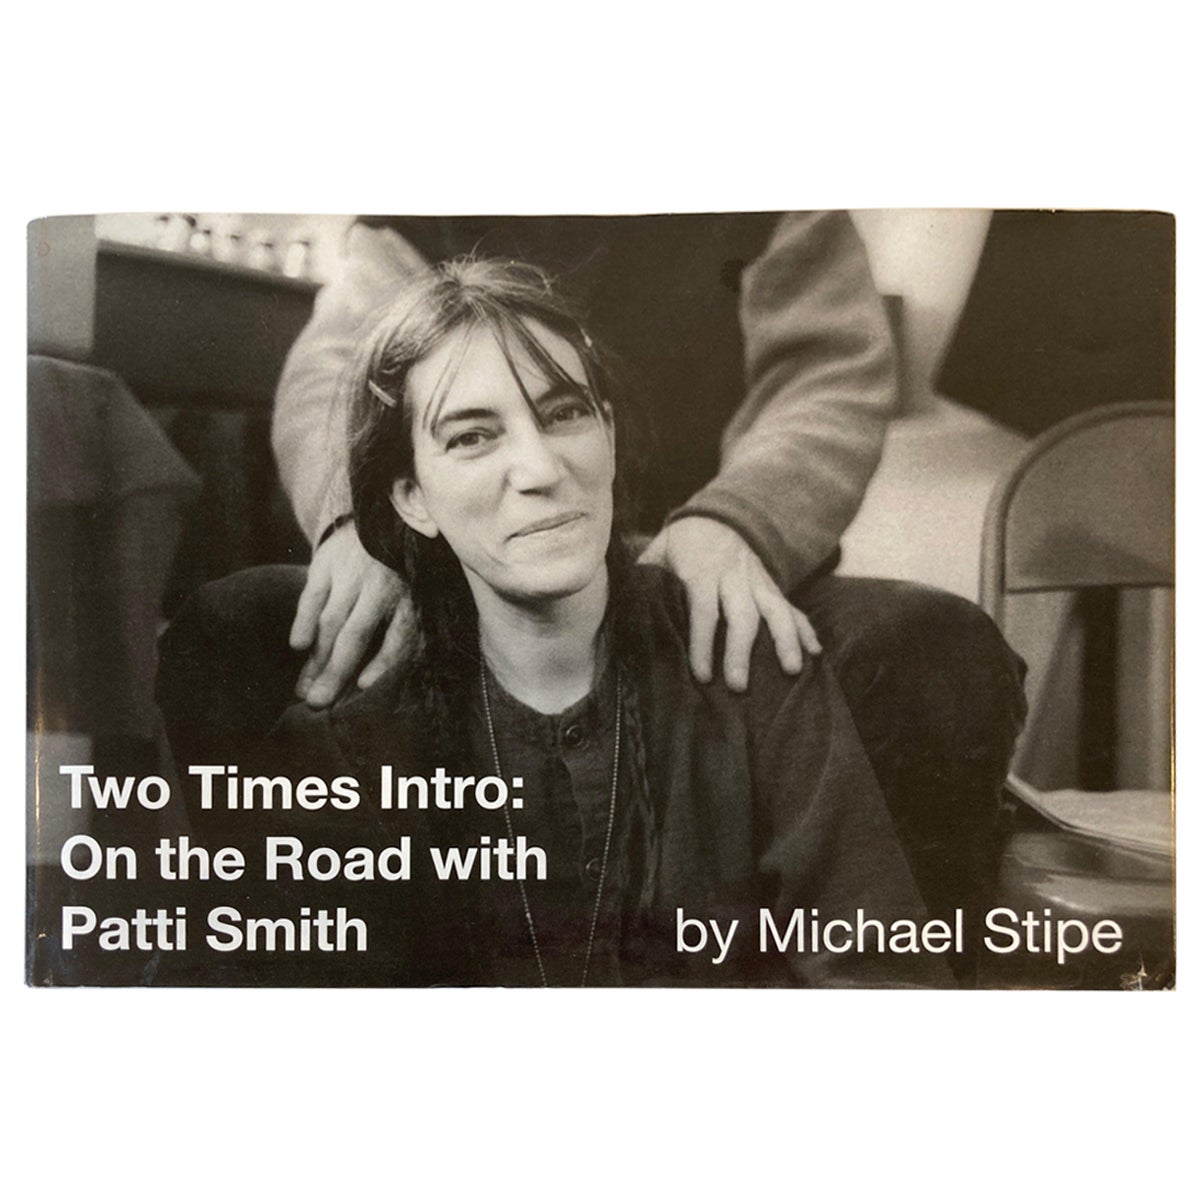 Two Times Intro On the Road with Patti Smith by Michael Stipe Hardcover Book